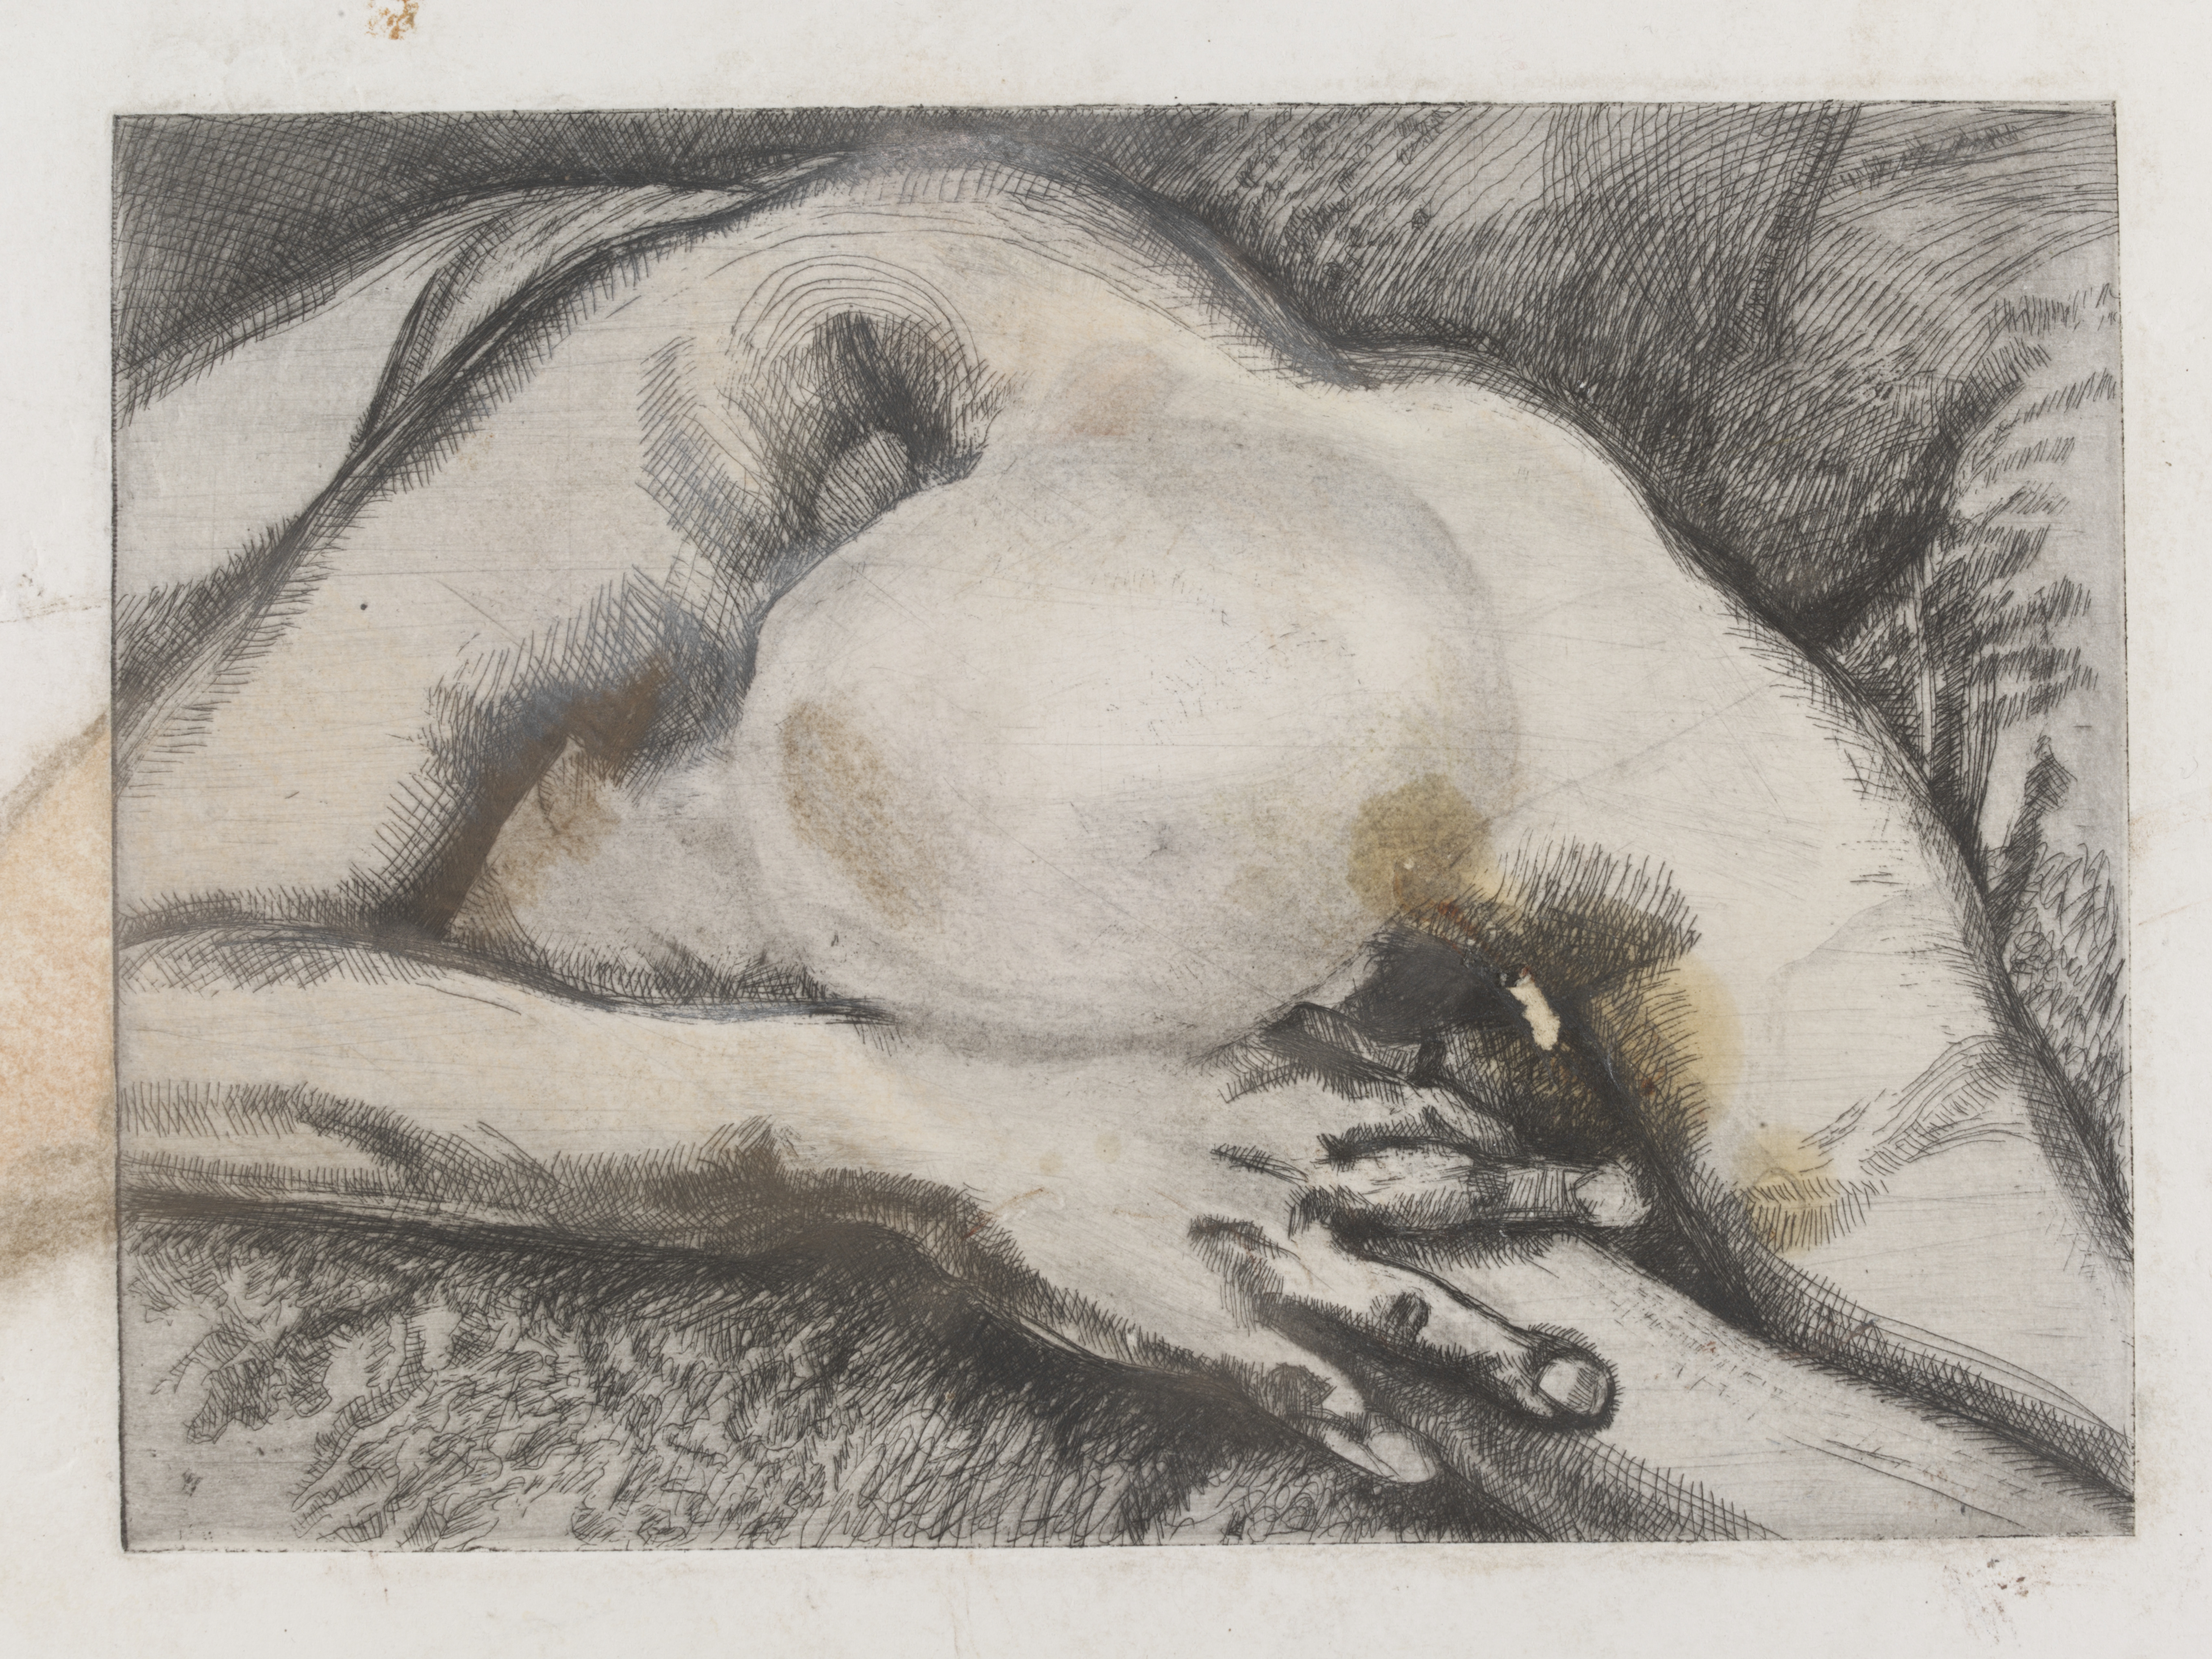 Lucian Freud's Etchings V&A -reclining figure